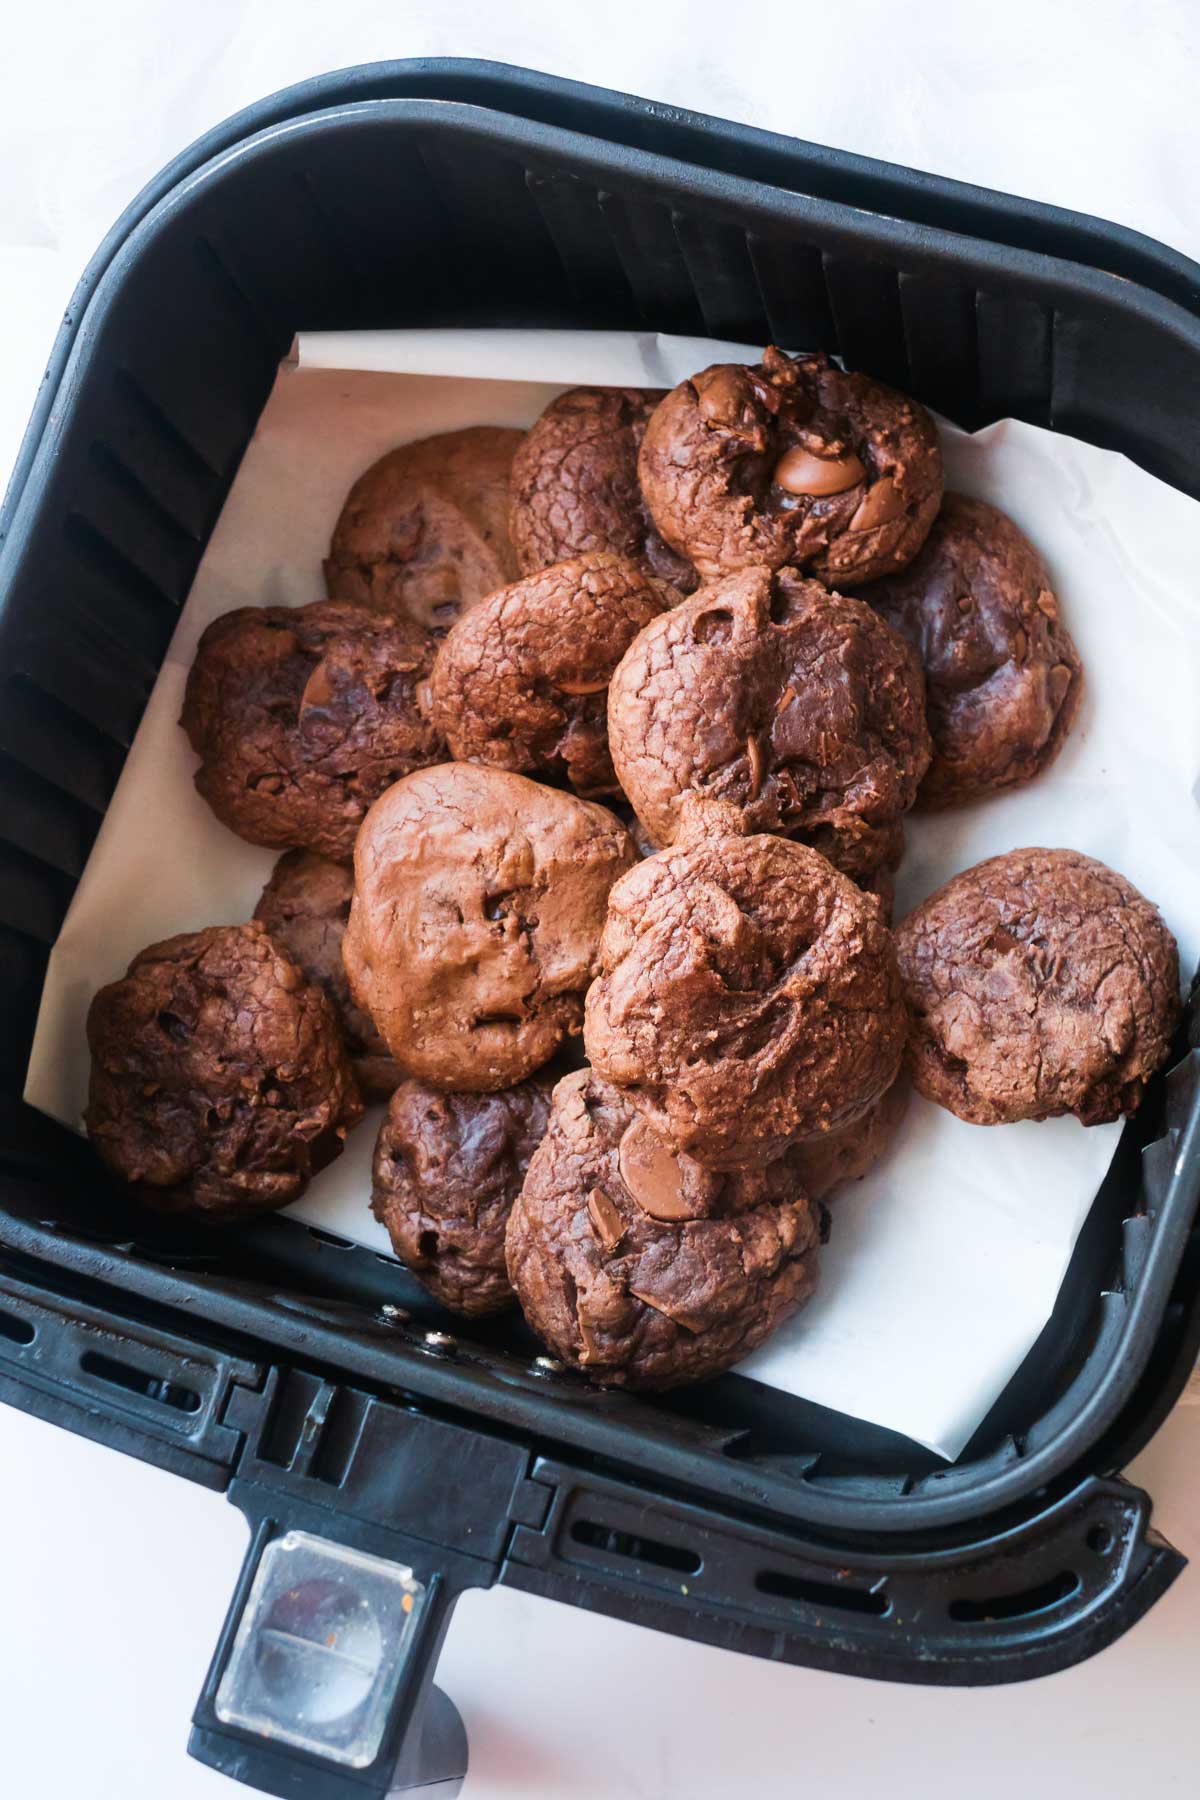 the finished brownie mix cookies inside the air fryer basket